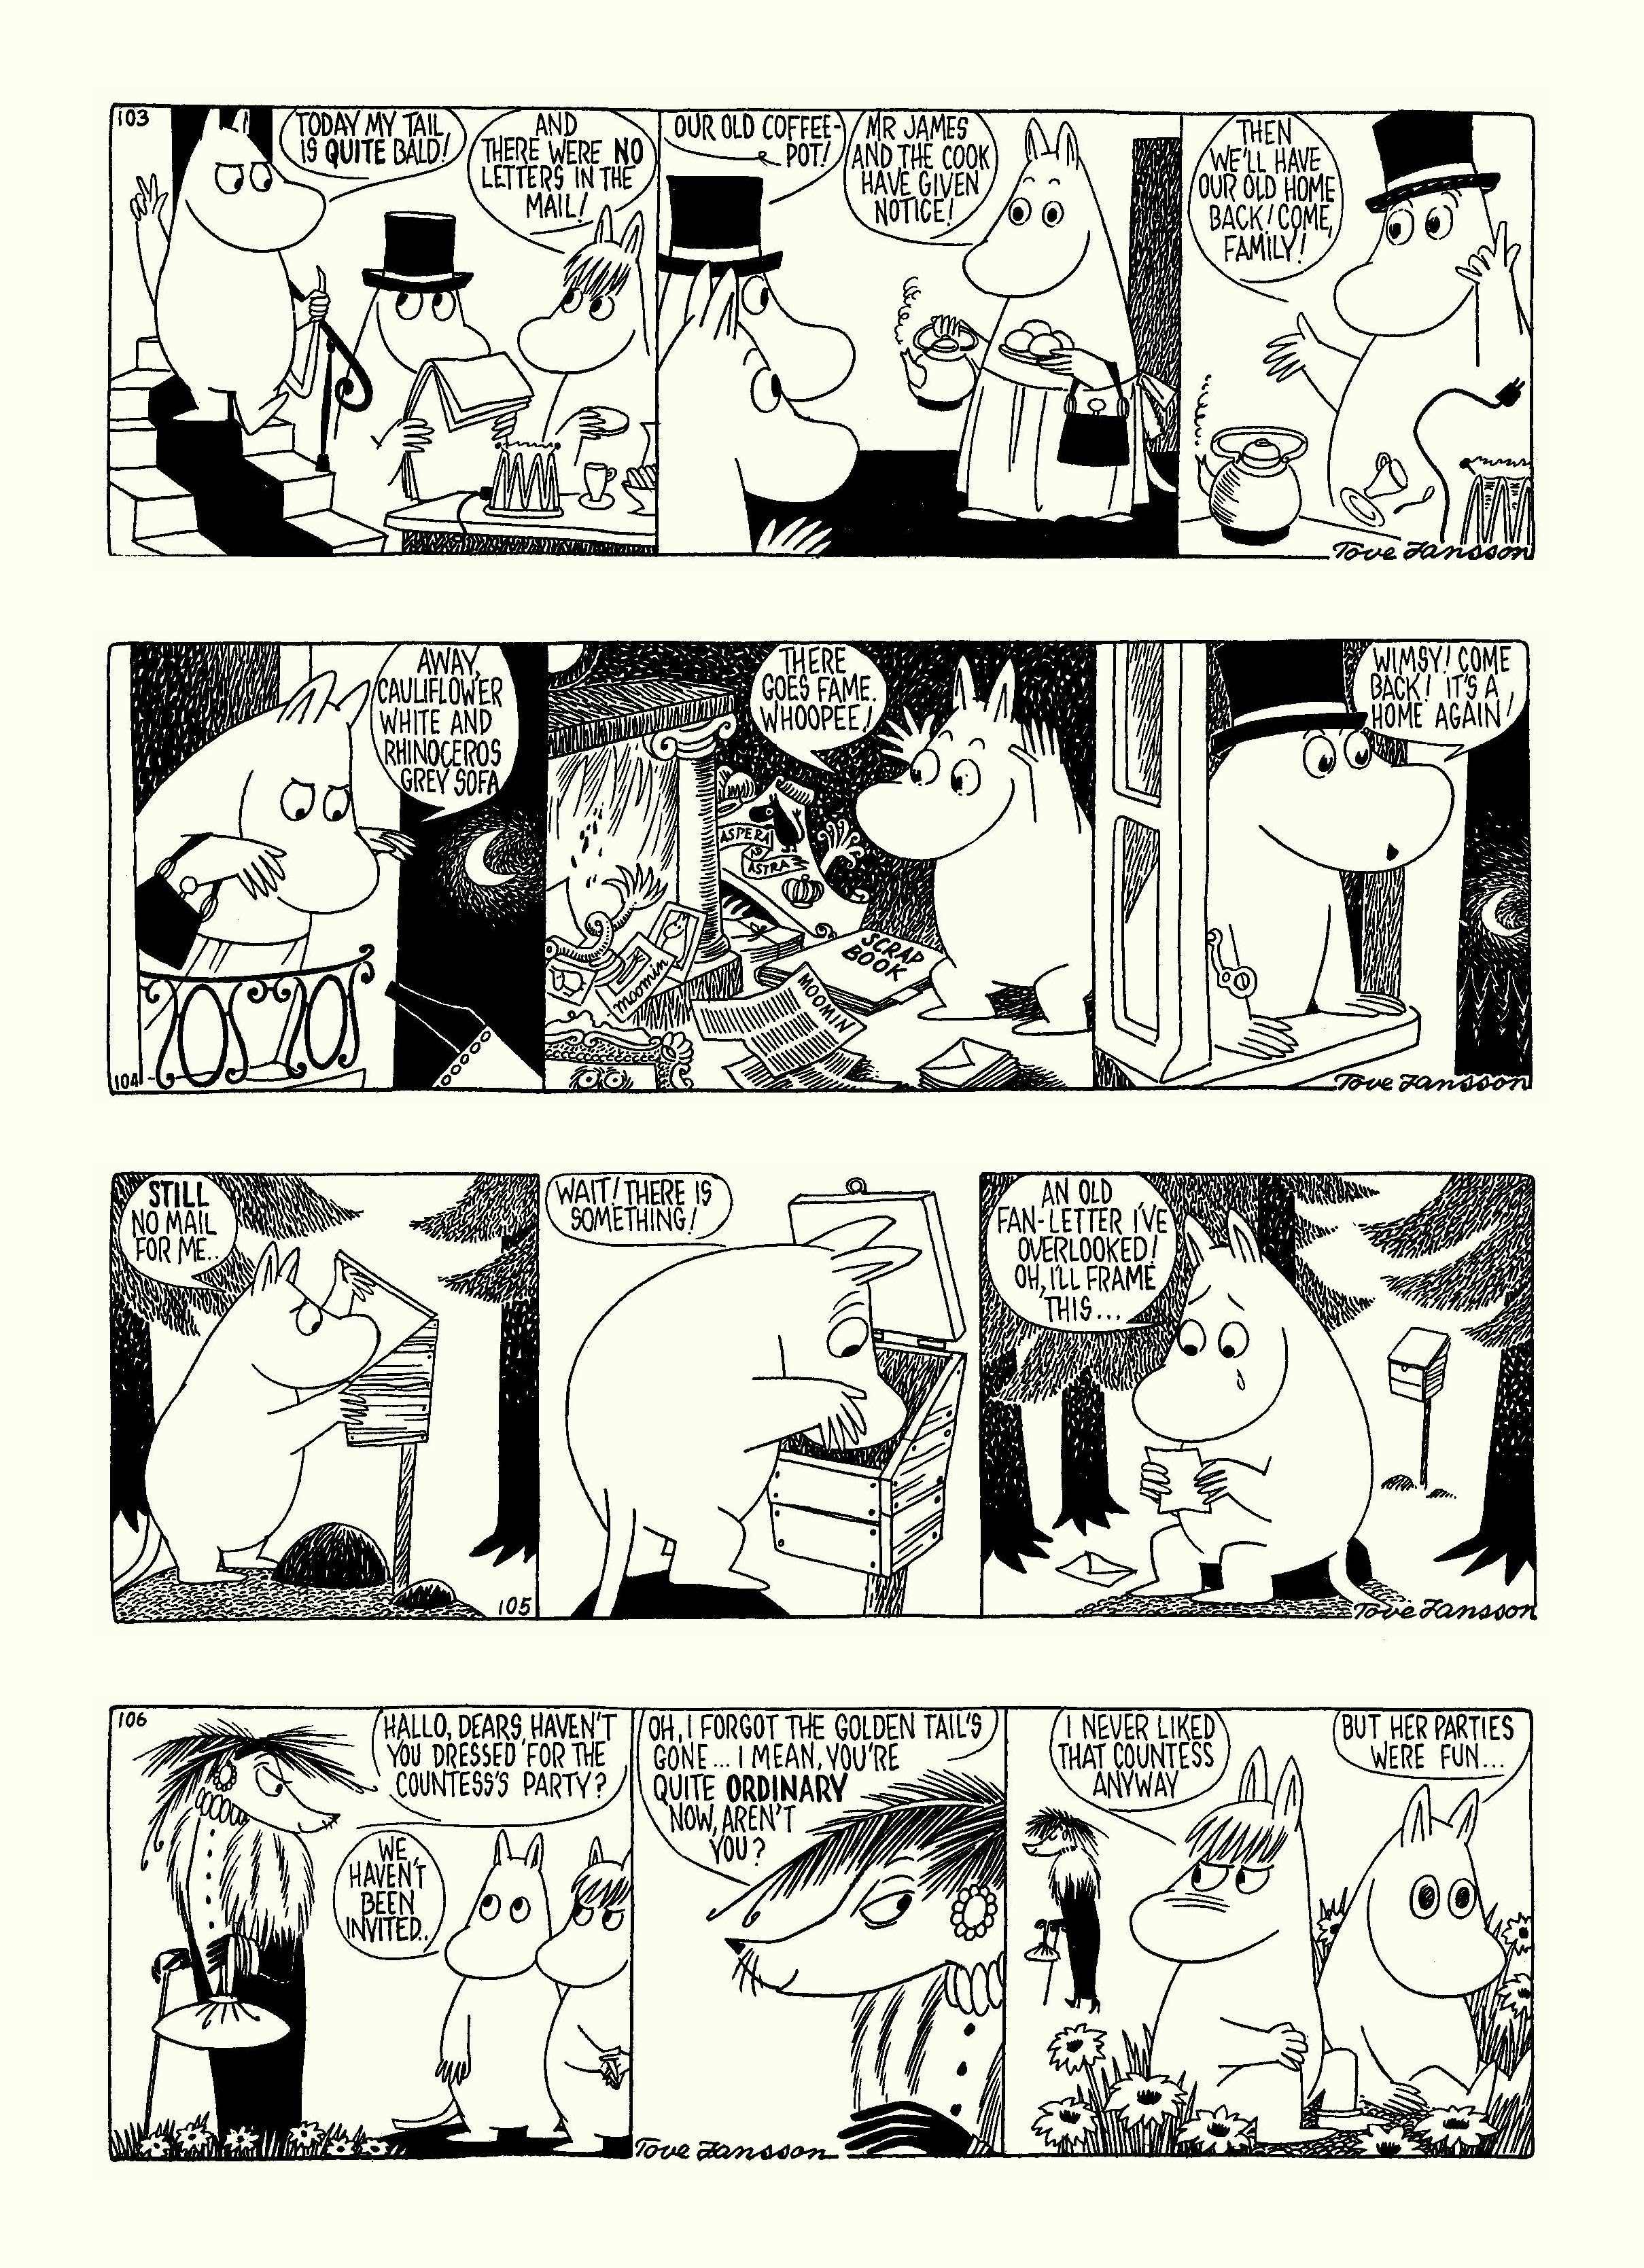 Read online Moomin: The Complete Tove Jansson Comic Strip comic -  Issue # TPB 4 - 105